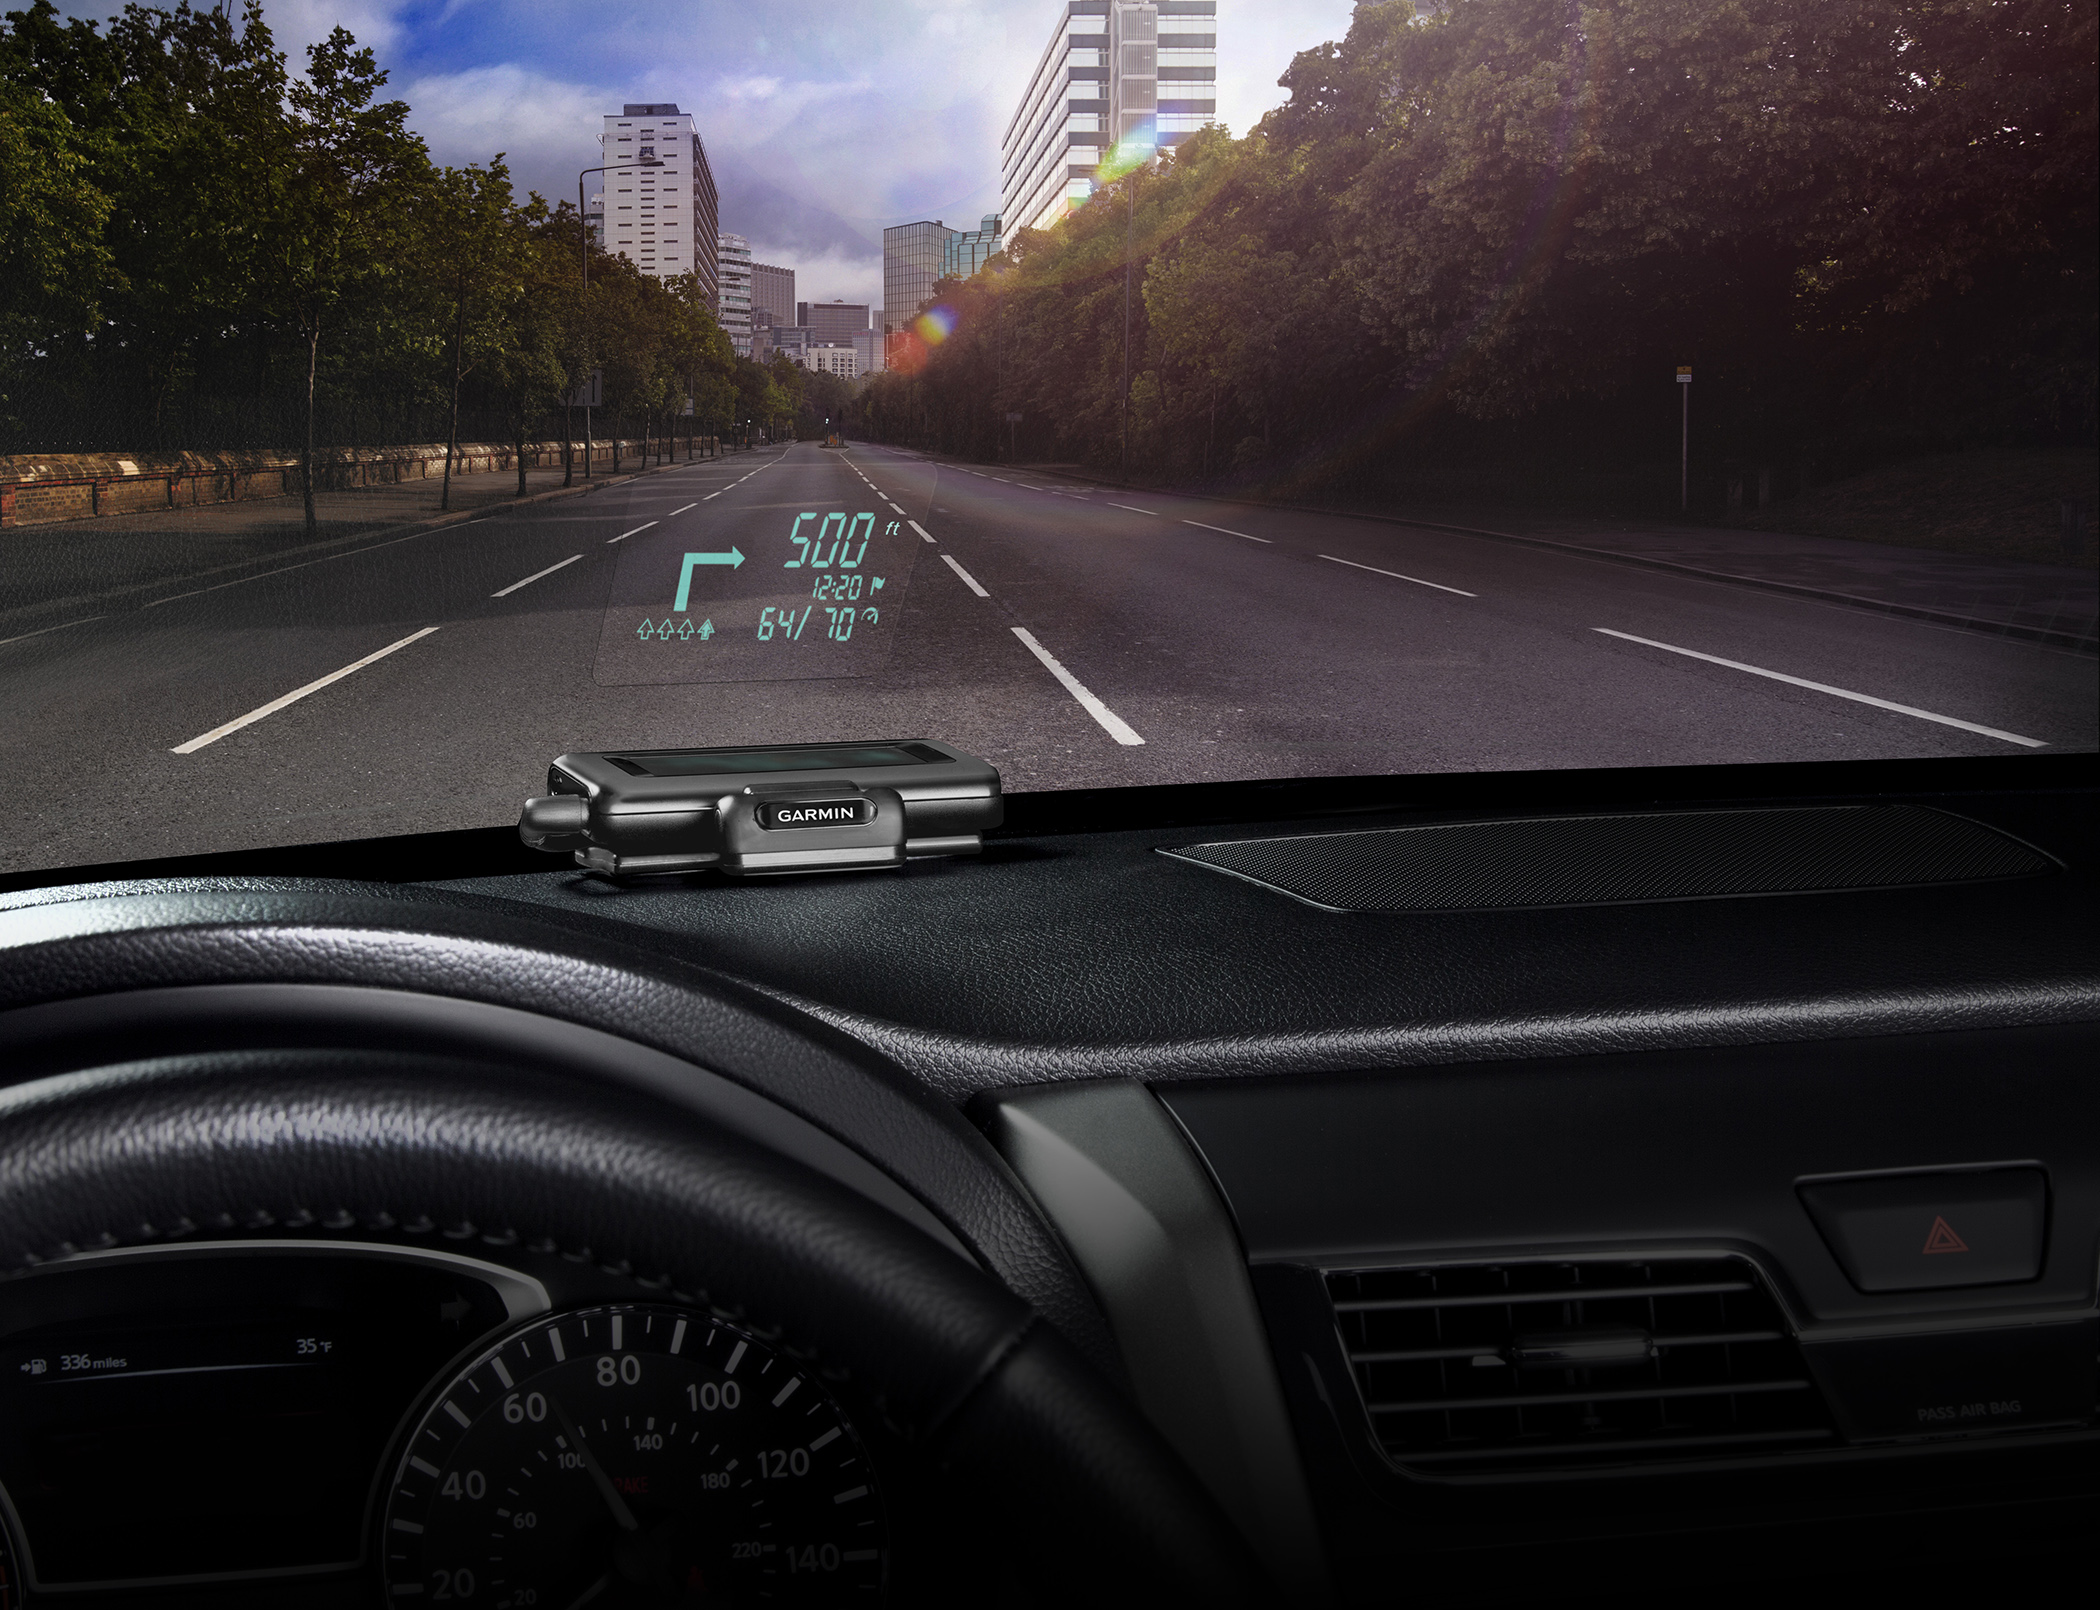 Heads-up display: Everything you need to know about it